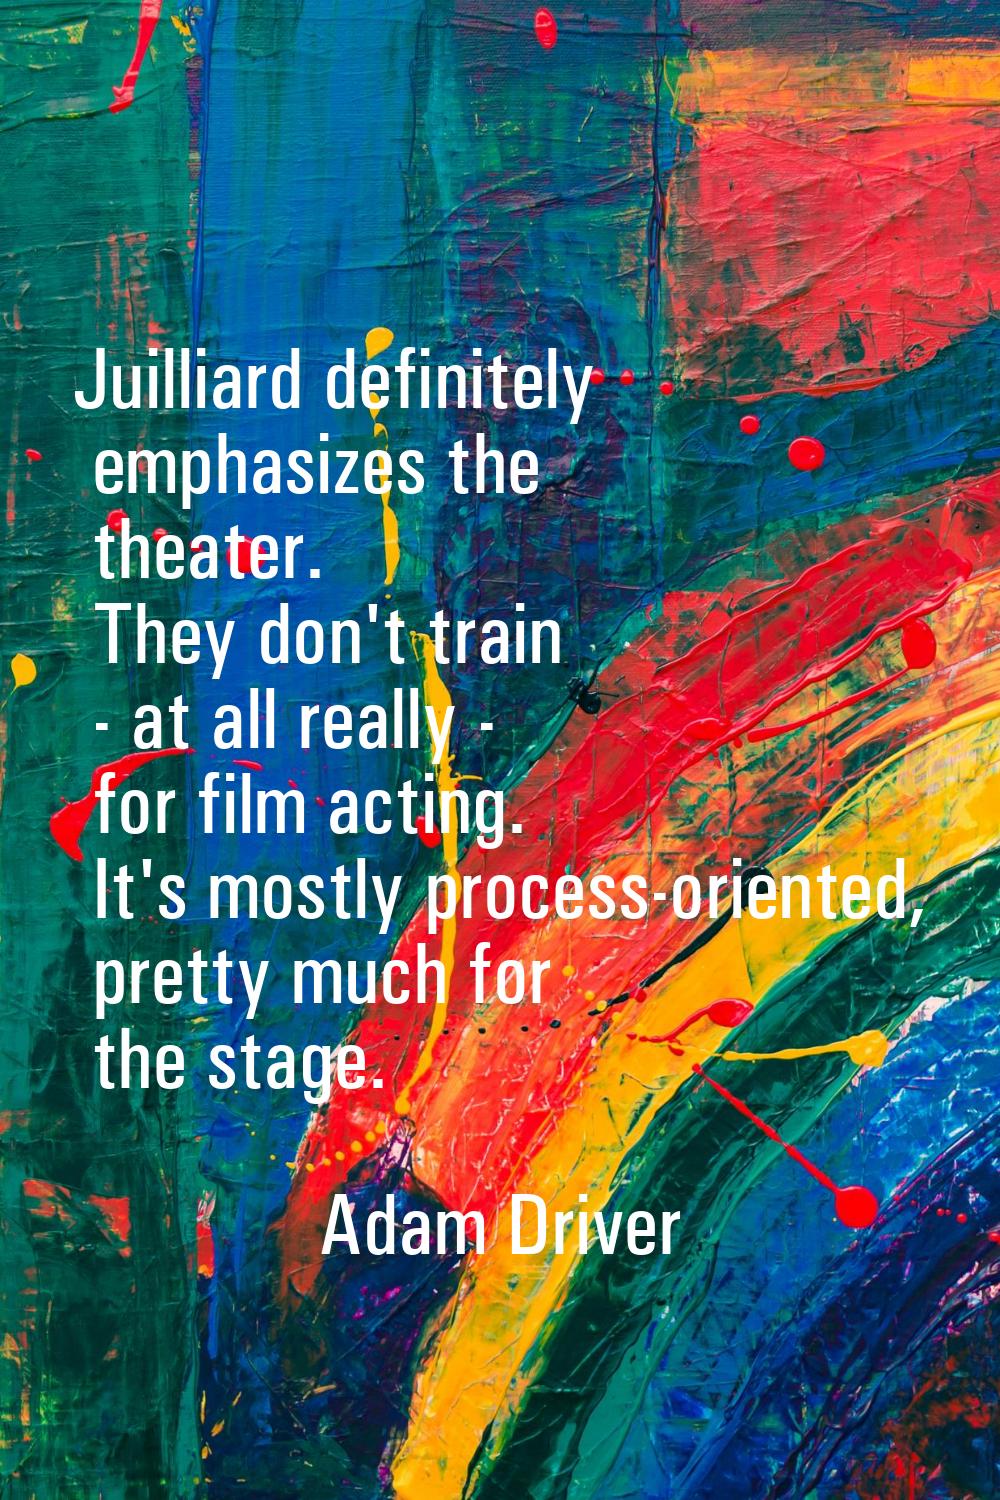 Juilliard definitely emphasizes the theater. They don't train - at all really - for film acting. It